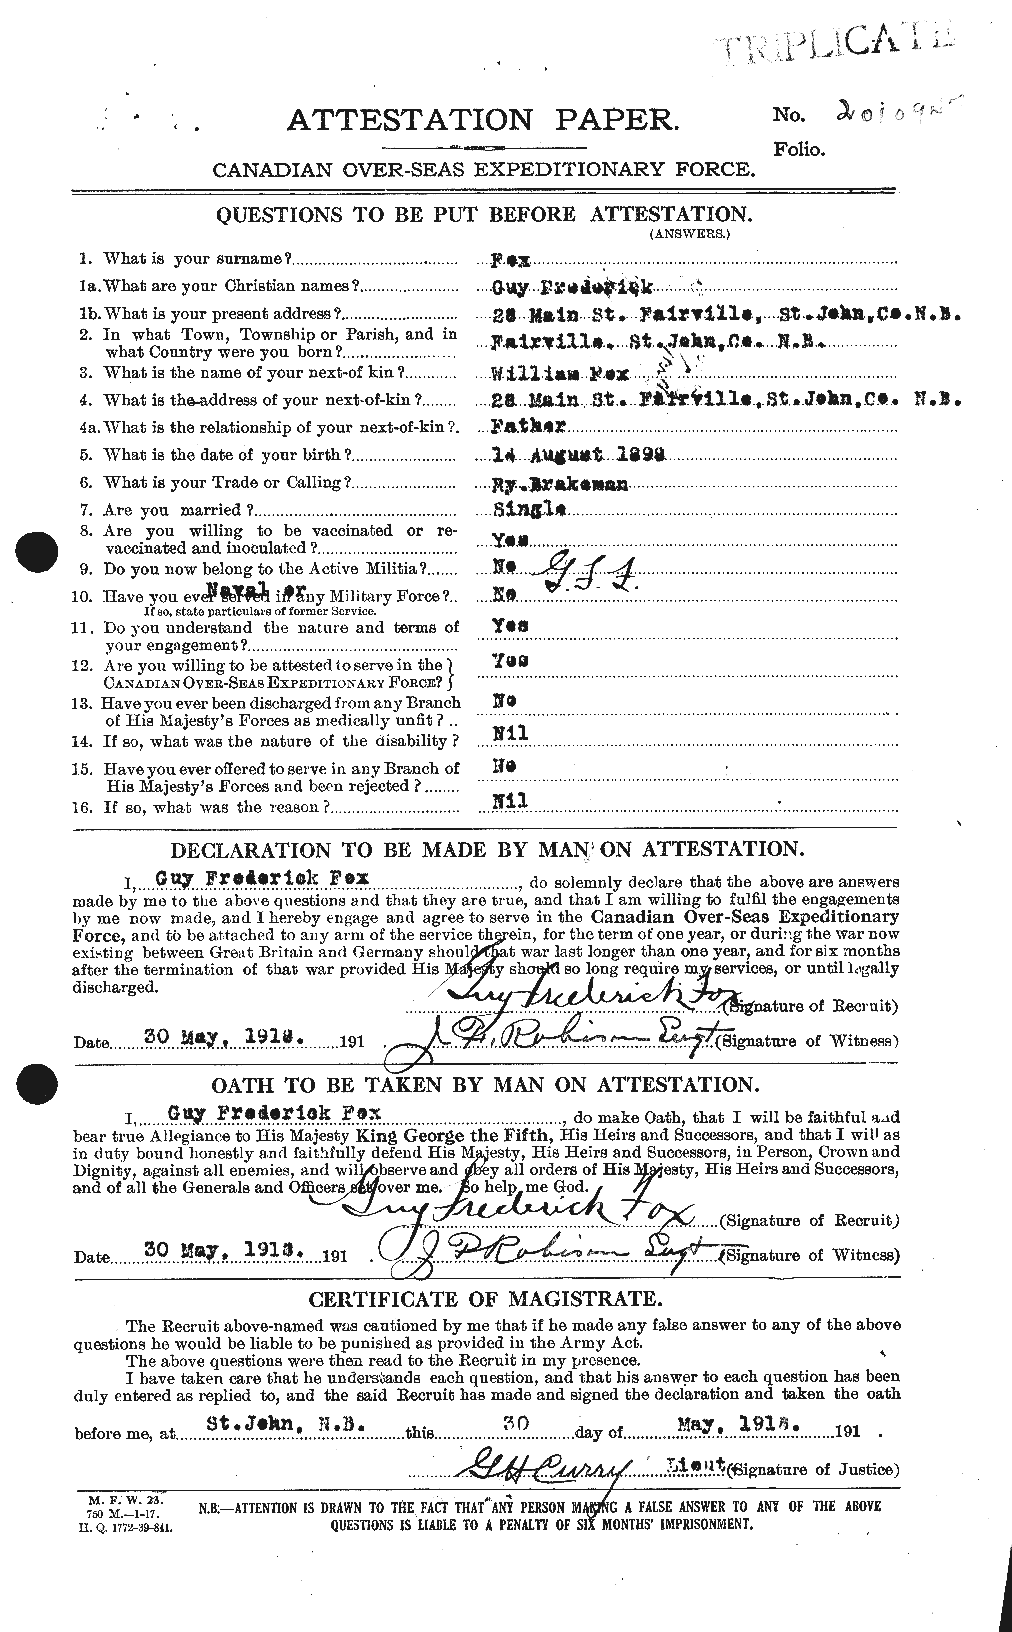 Personnel Records of the First World War - CEF 332497a